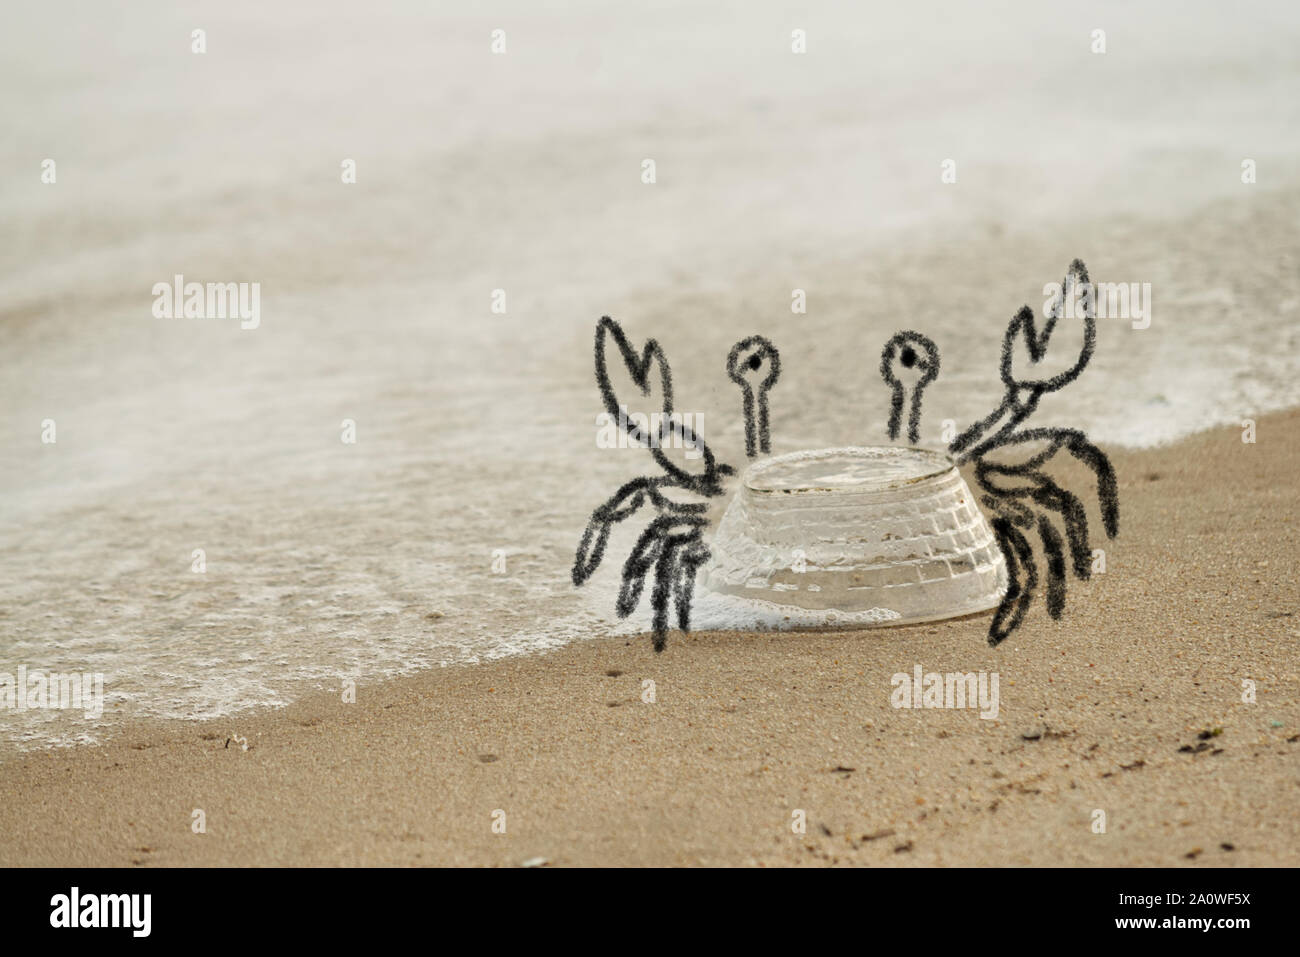 Funny doodle of crab made out of an image of plastic bowl being dumped on the beach, irony doodle of marine life being suffered from human plastic wat Stock Photo